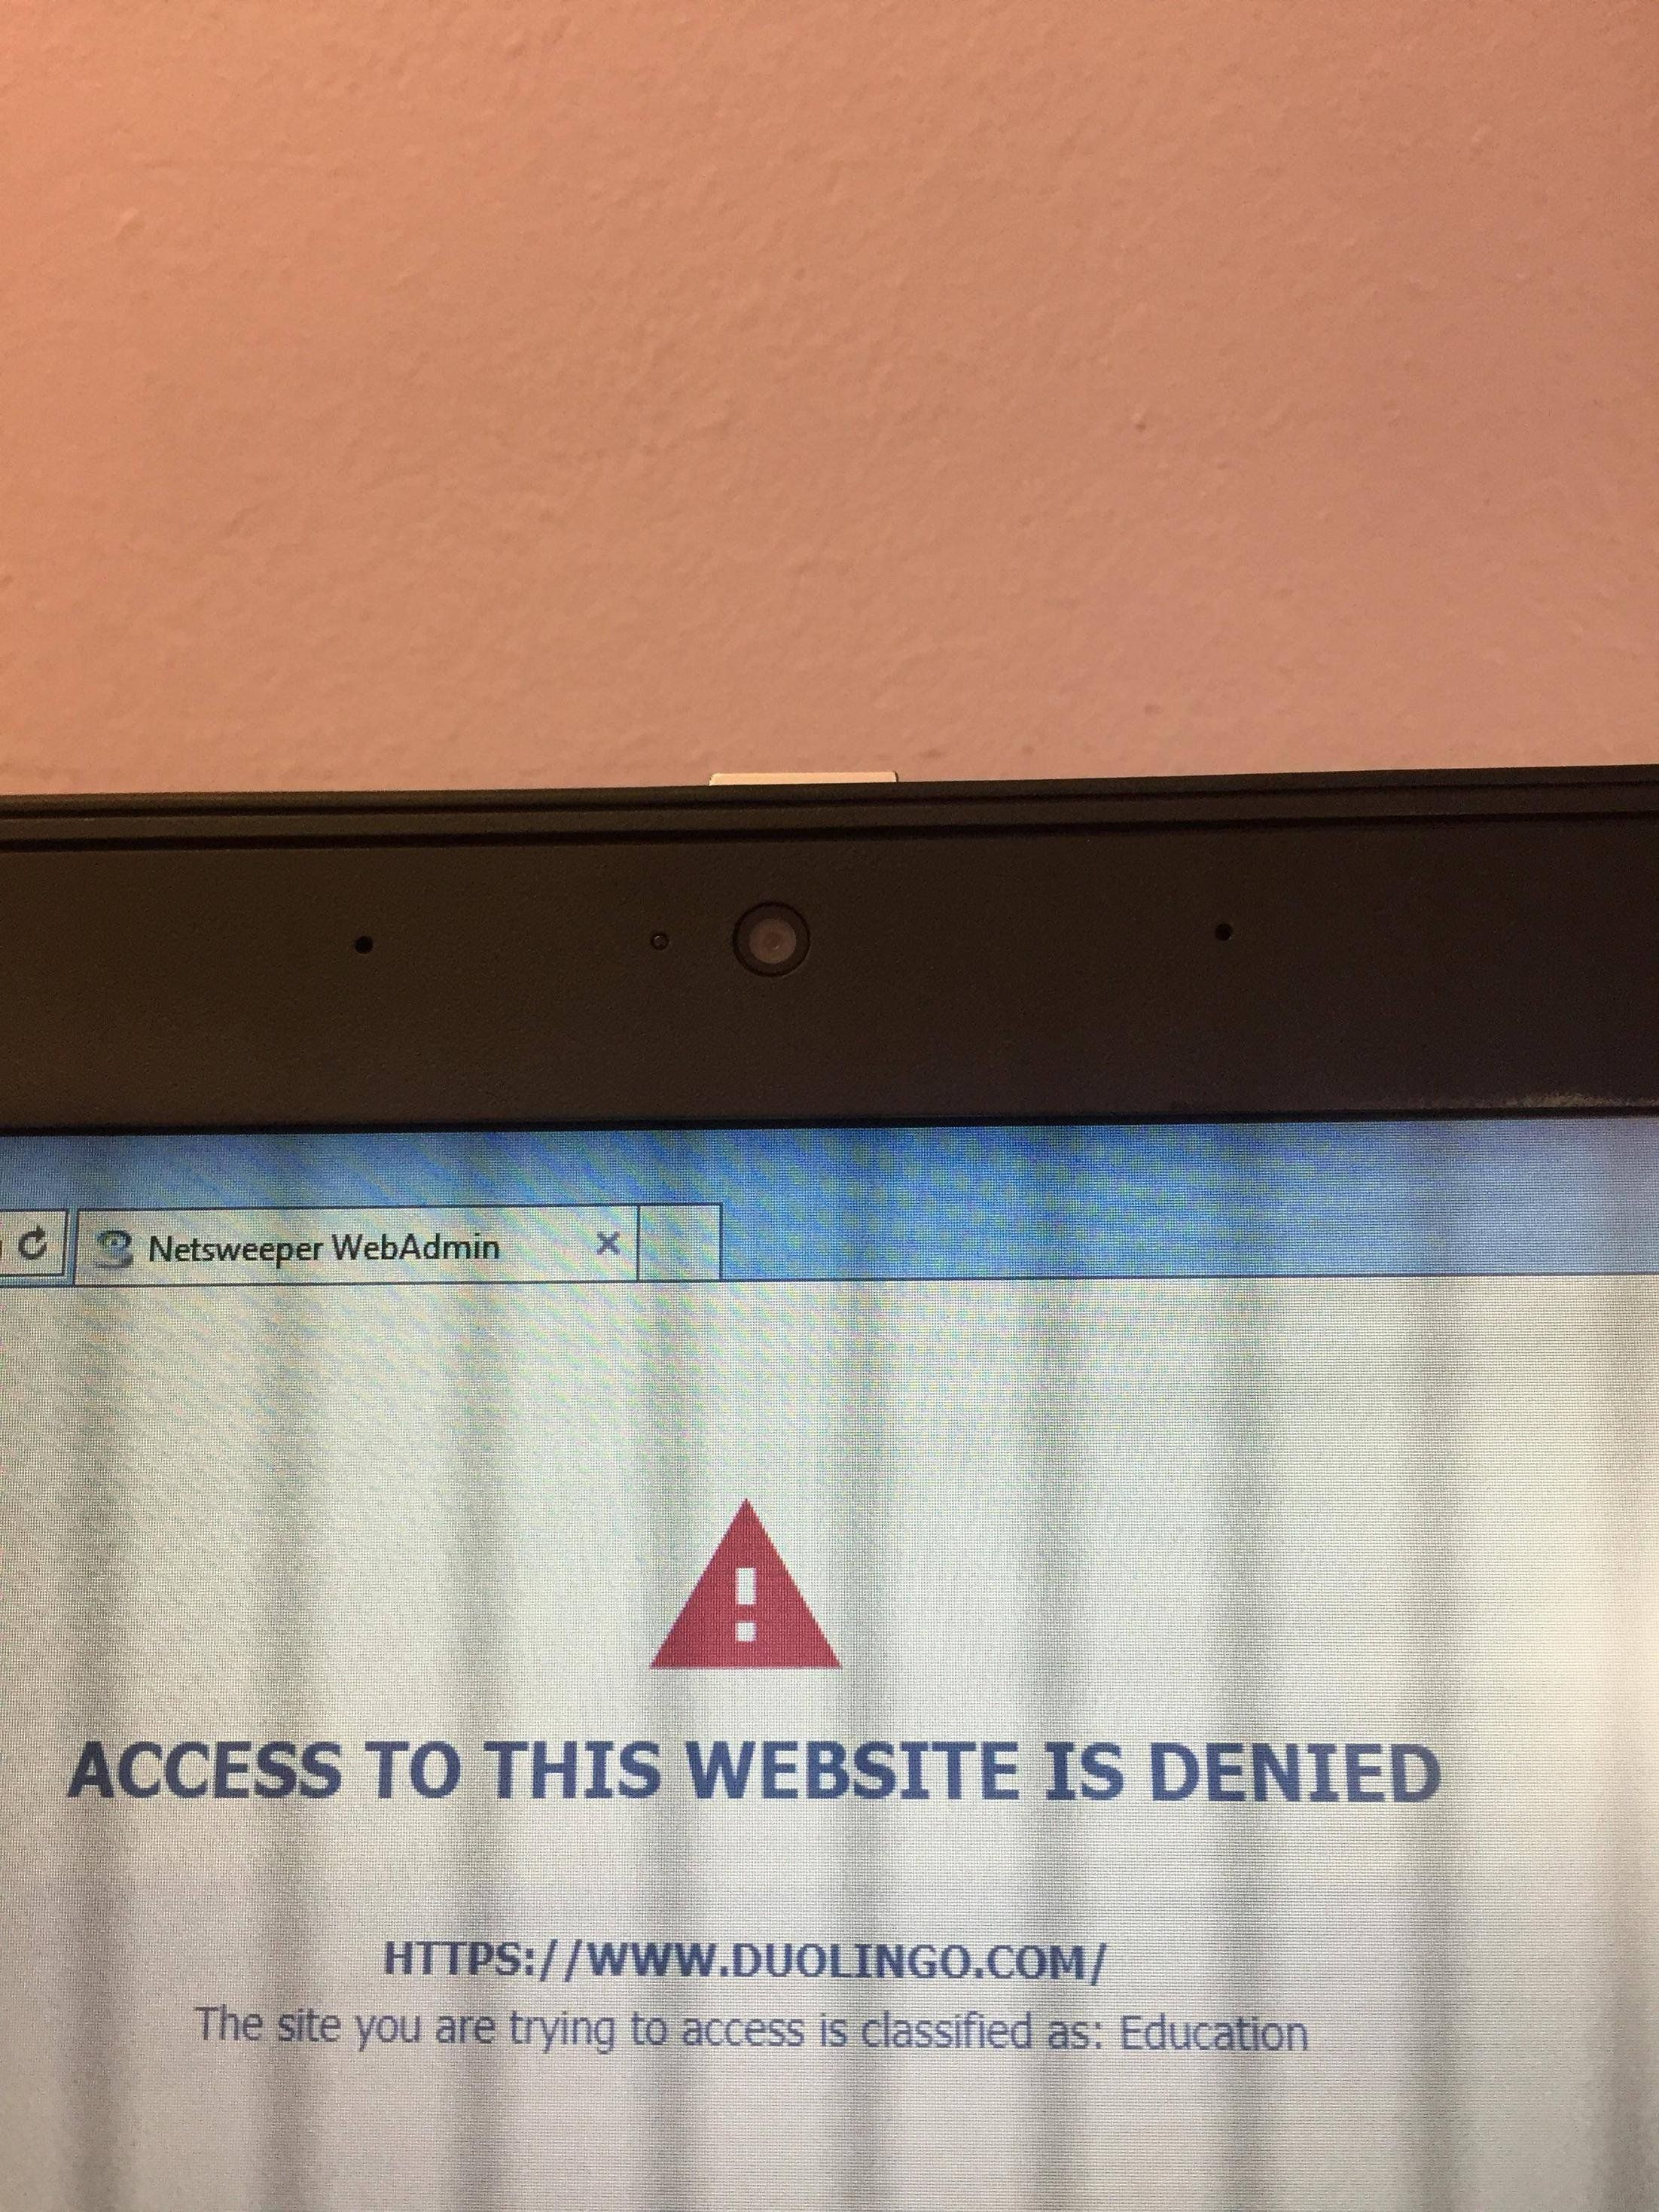 This school blocked a site because it was educational